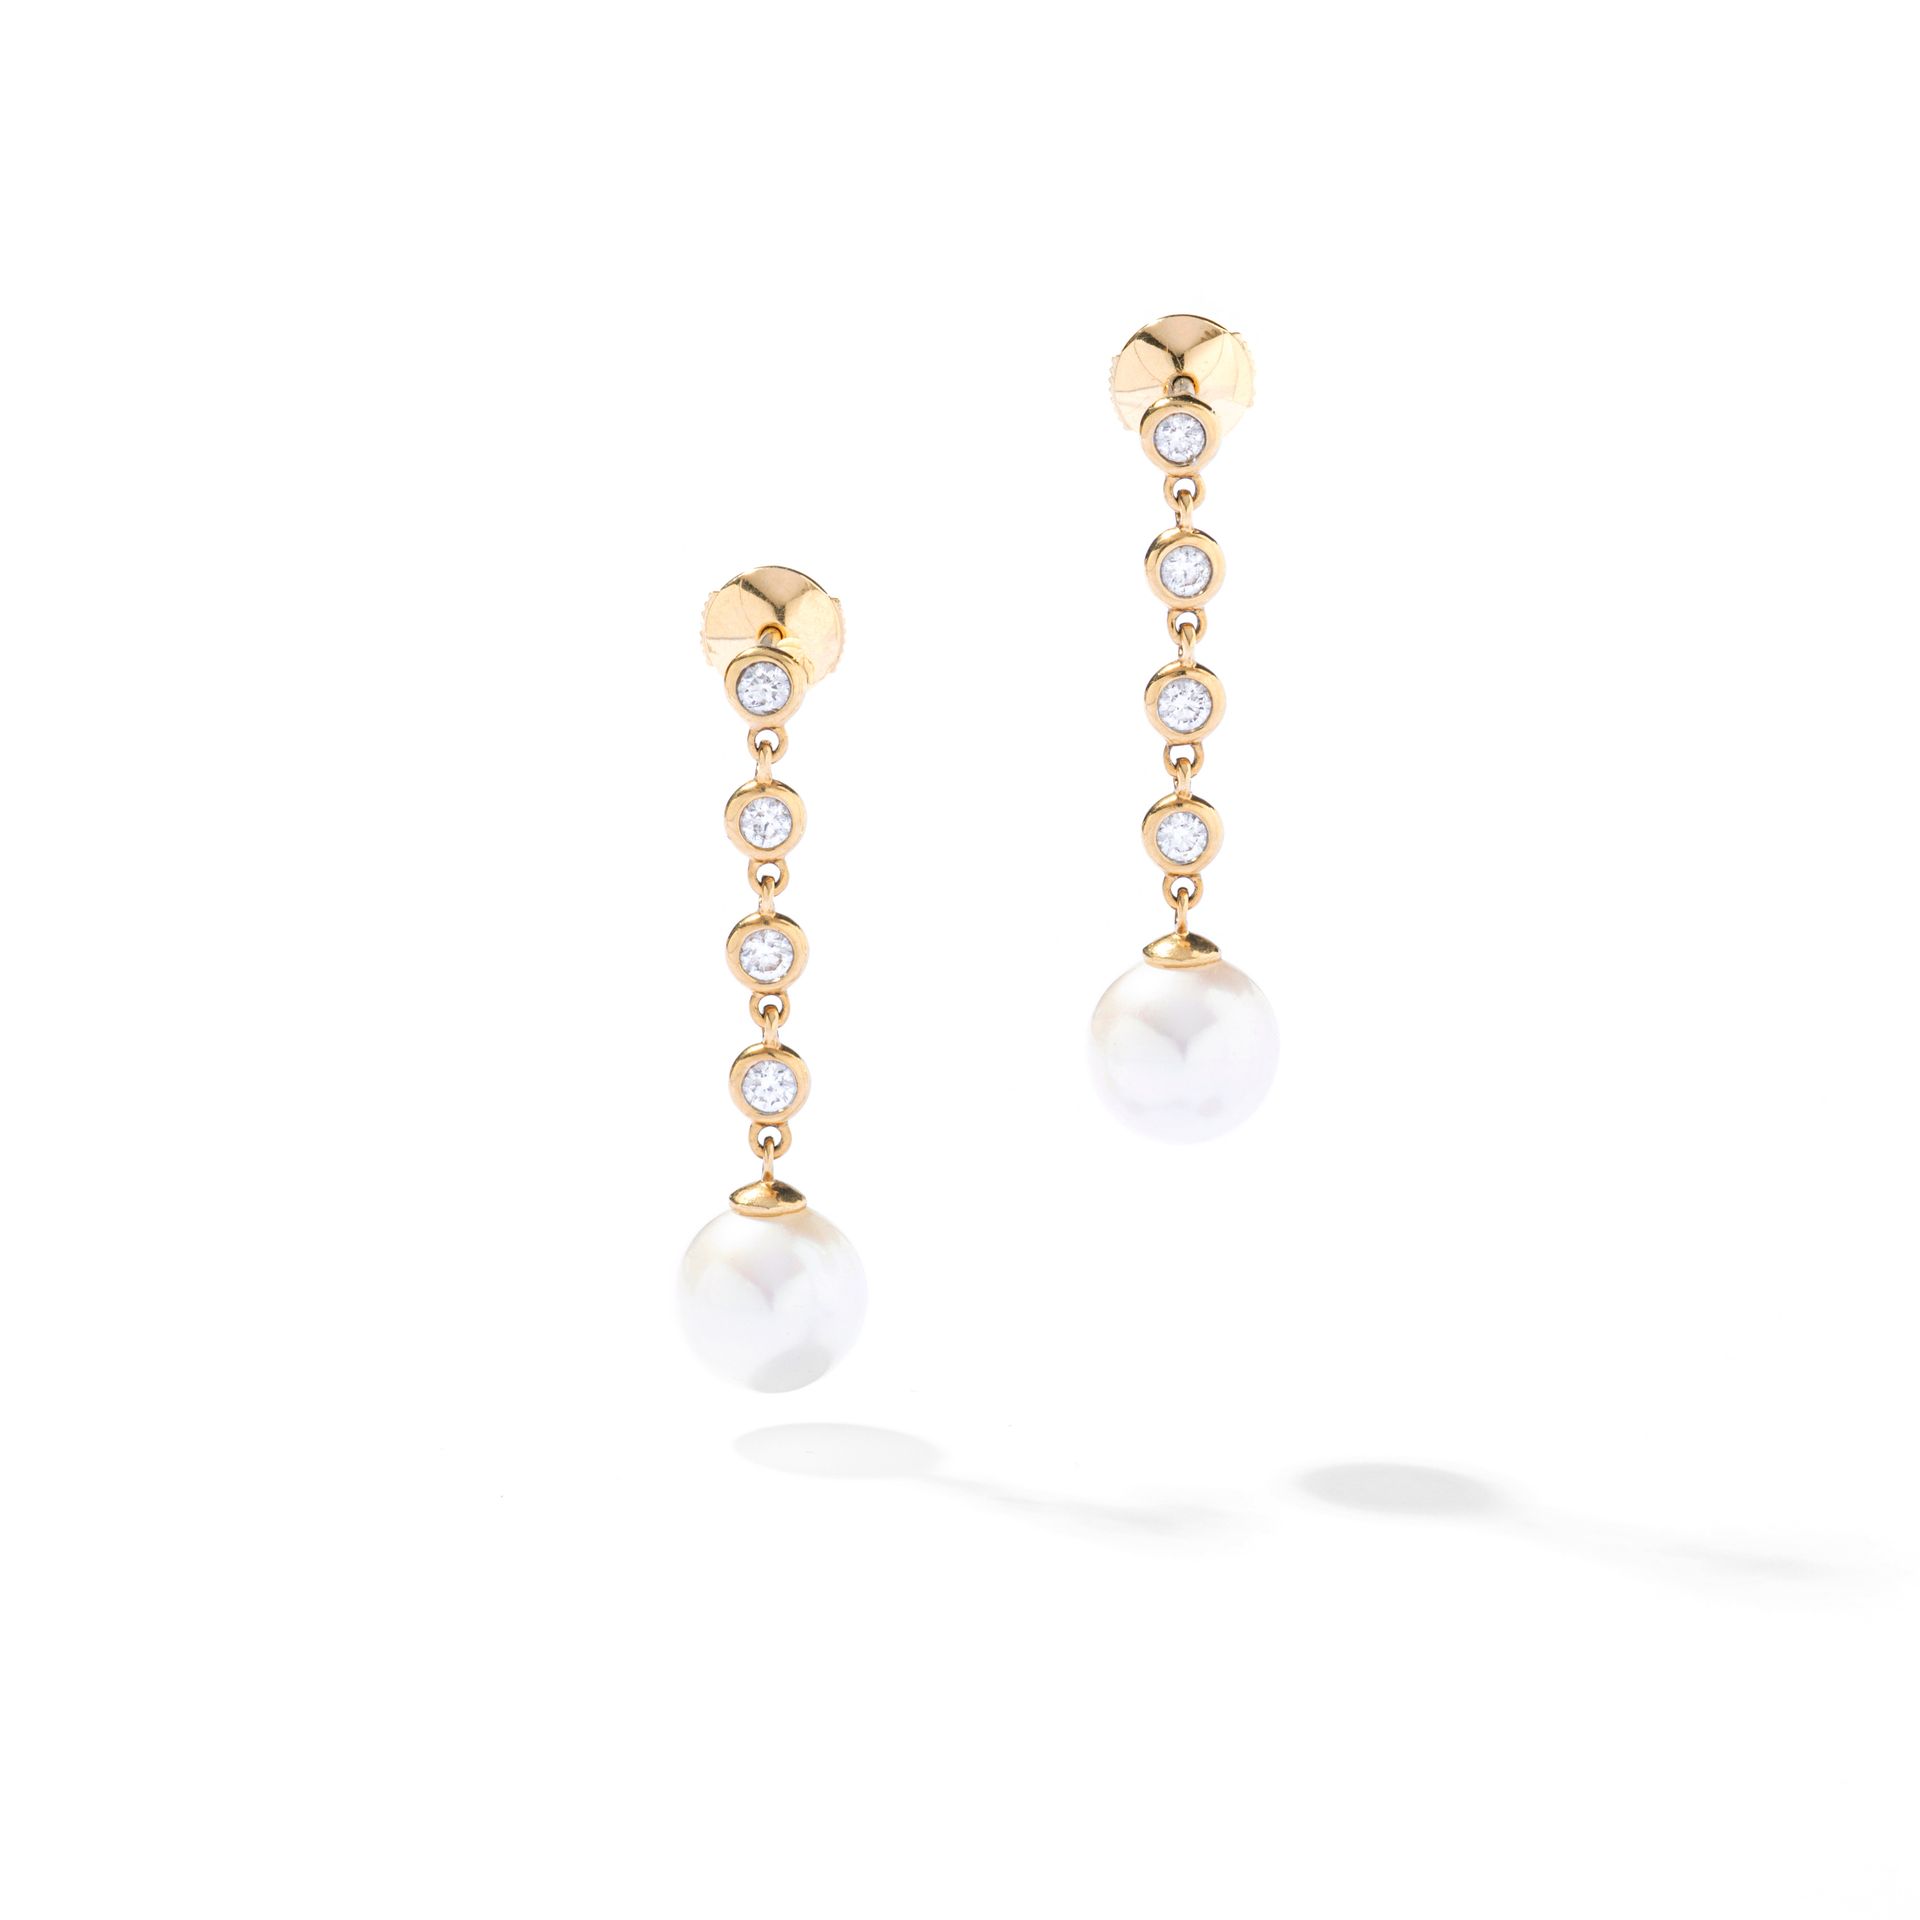 Null Earrings in 18 ct yellow gold, a line of diamonds in closed setting, at the&hellip;